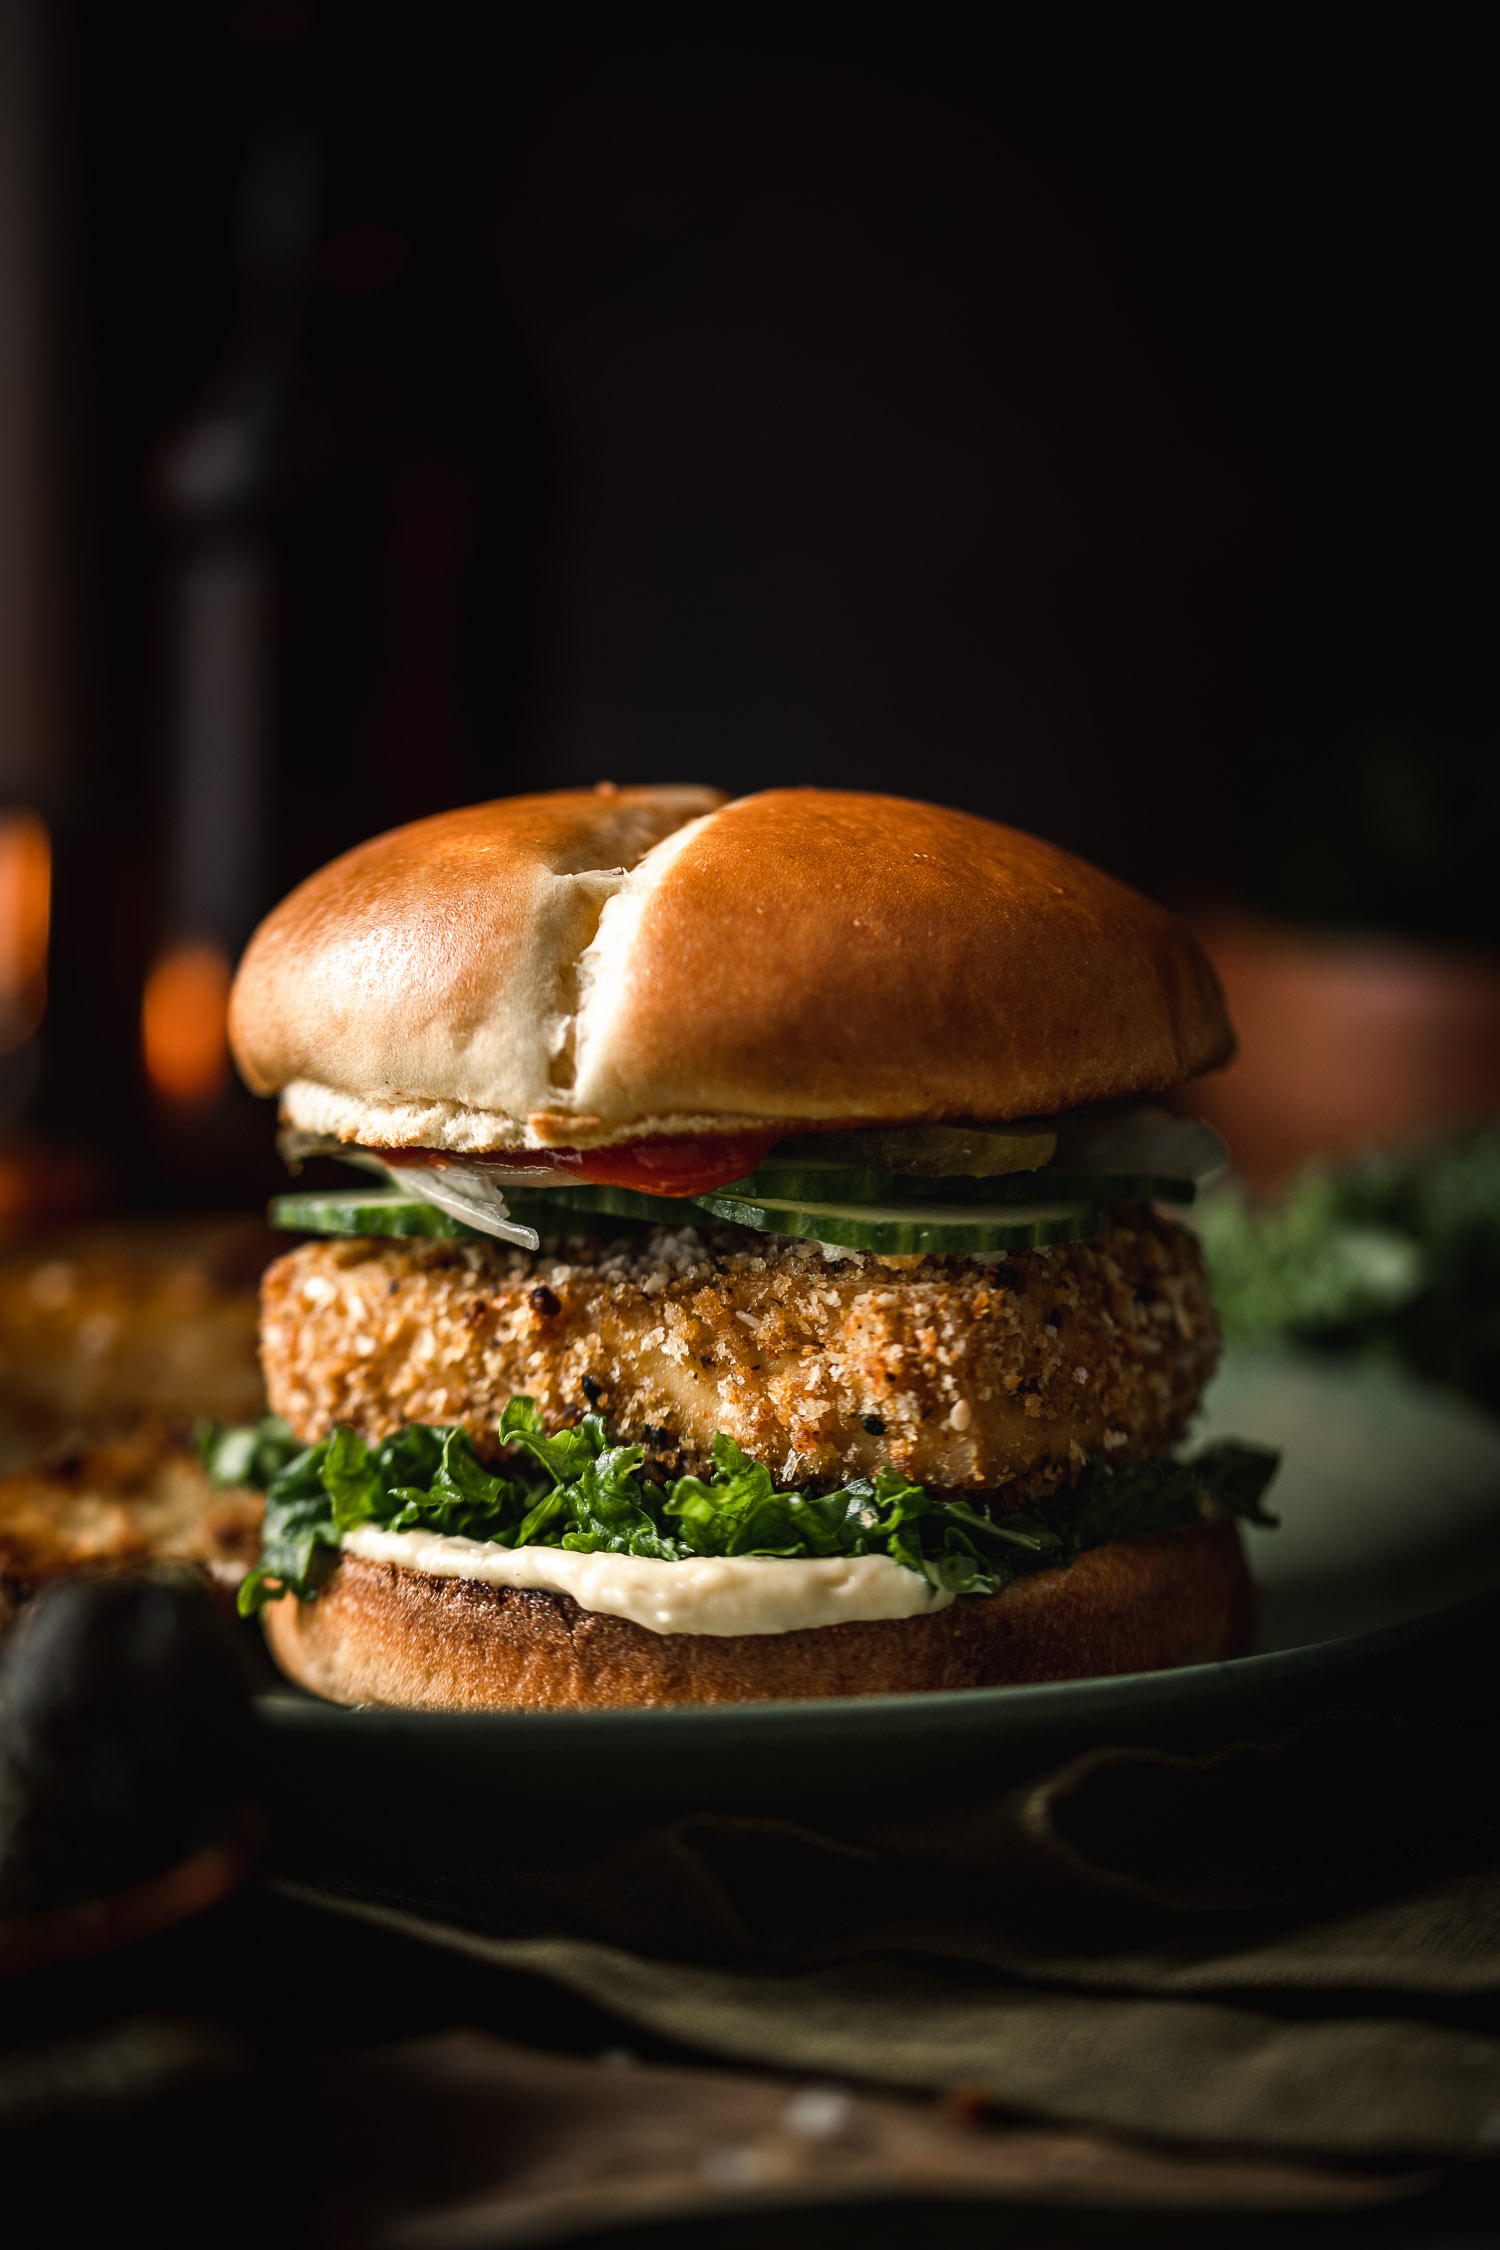 Panko Crusted Tofu Burger with Truffle Massaged Kale on a plate with candlelight in the background